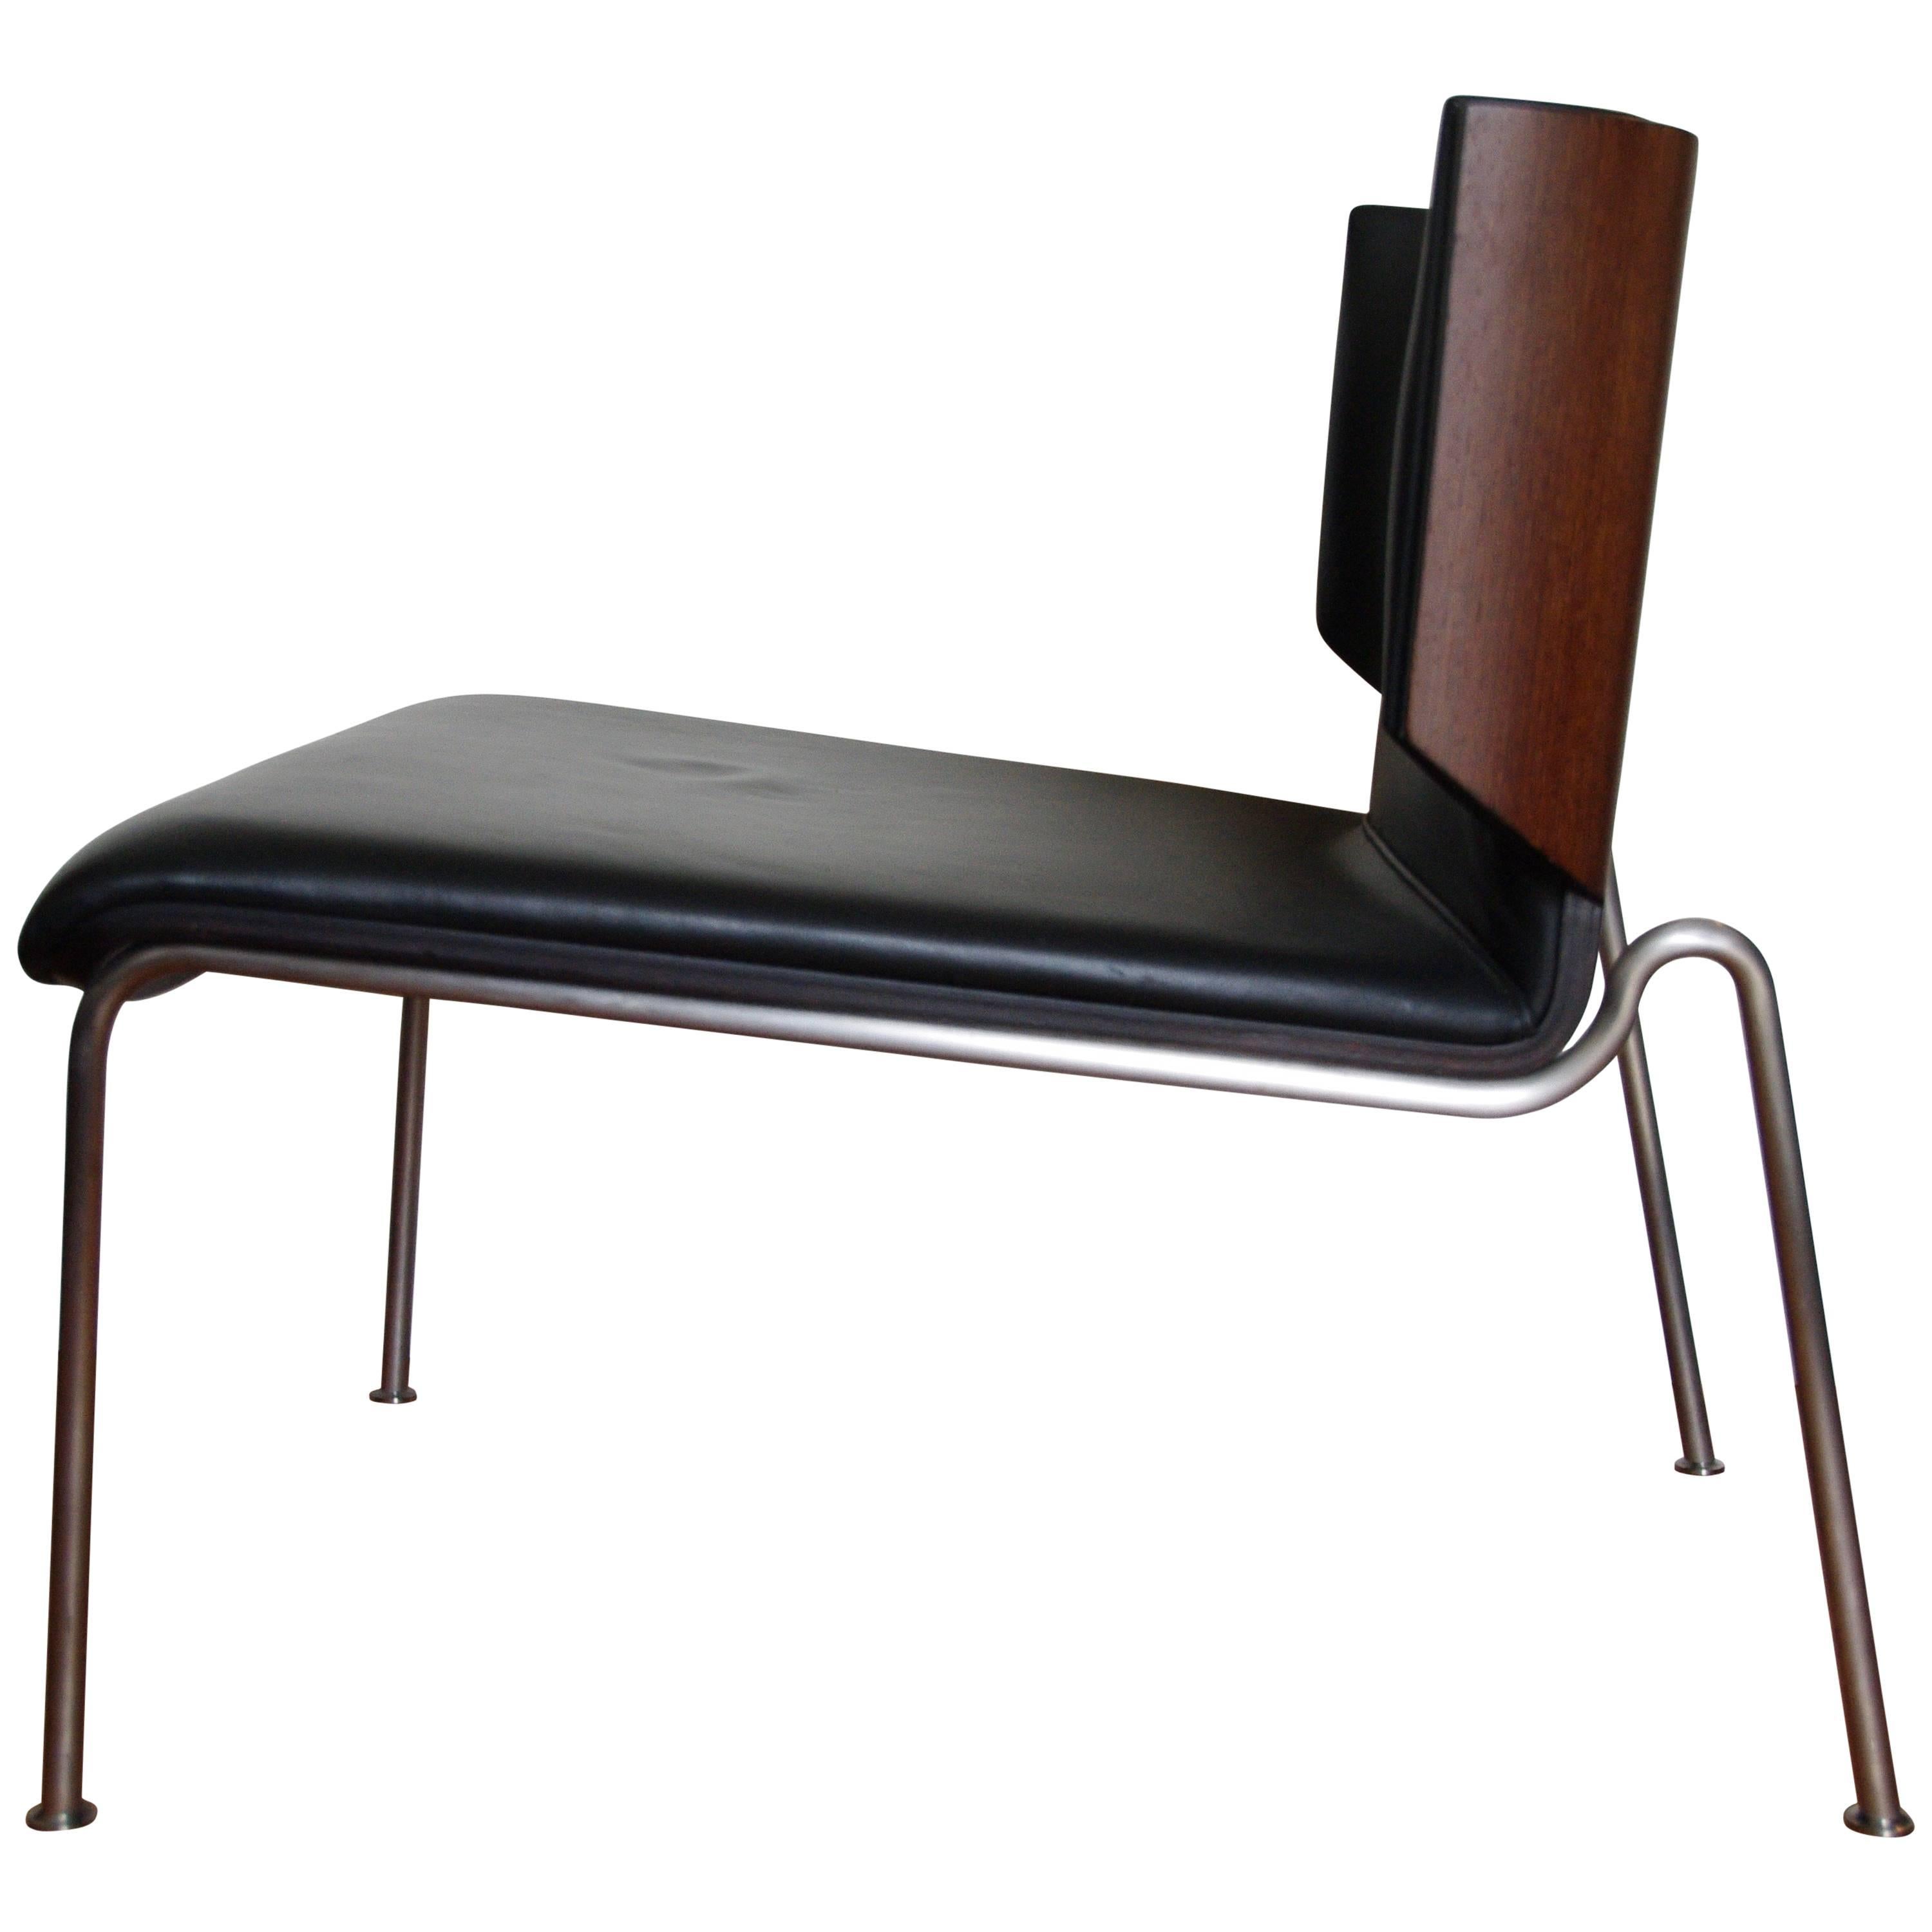 Italian Modern Armchair, Black Leather and Wenge Wood, Italy For Sale